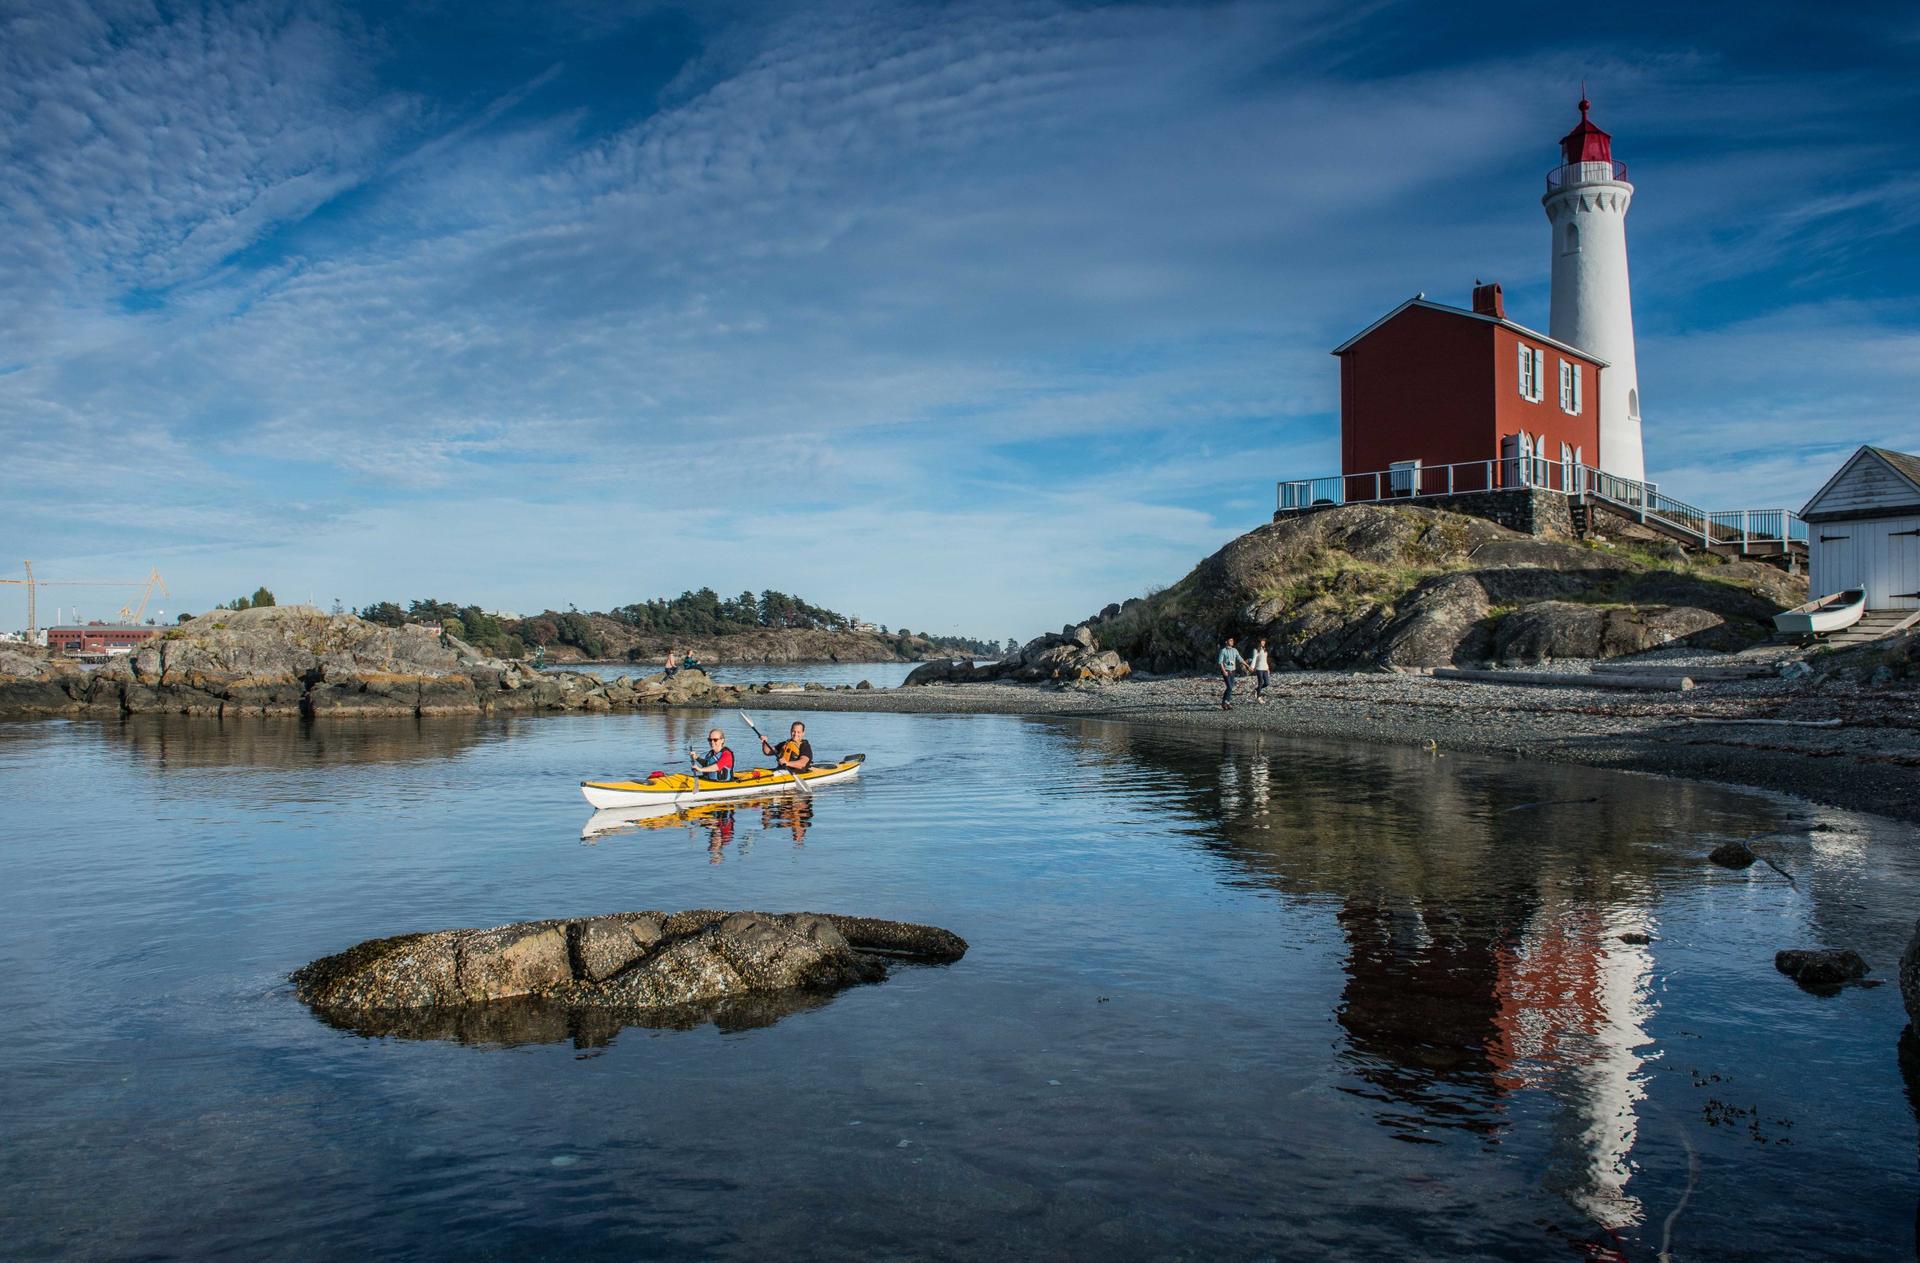 The often calm waters of Esquimalt Lagoon makes for a nice paddle close to the lighthouse.